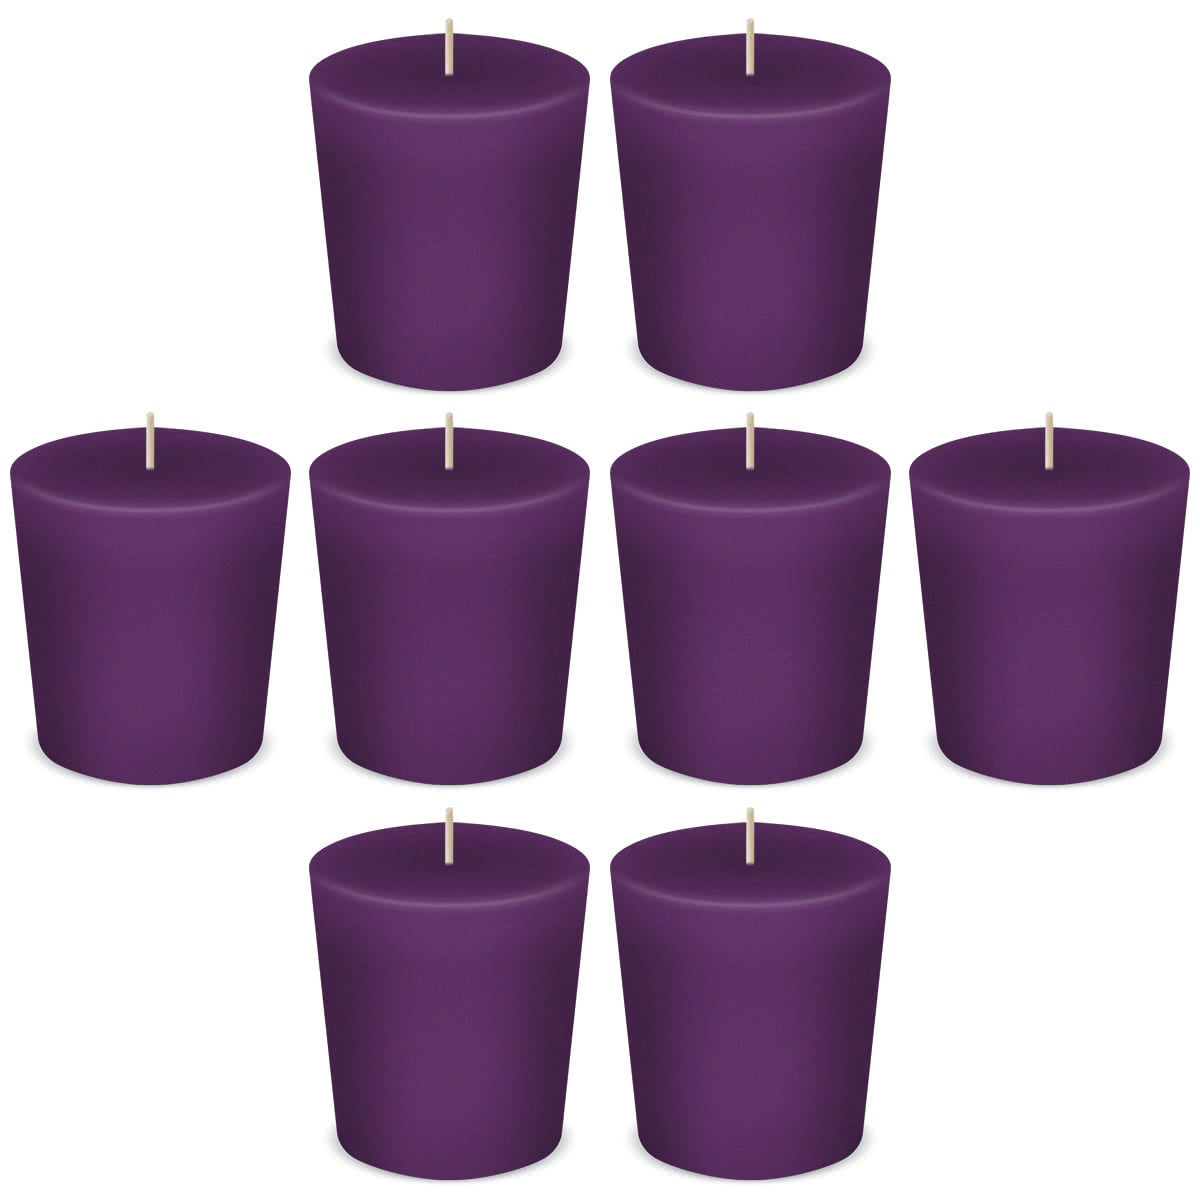 Lavender Votive Scented Candles by American Candle - Box of 8